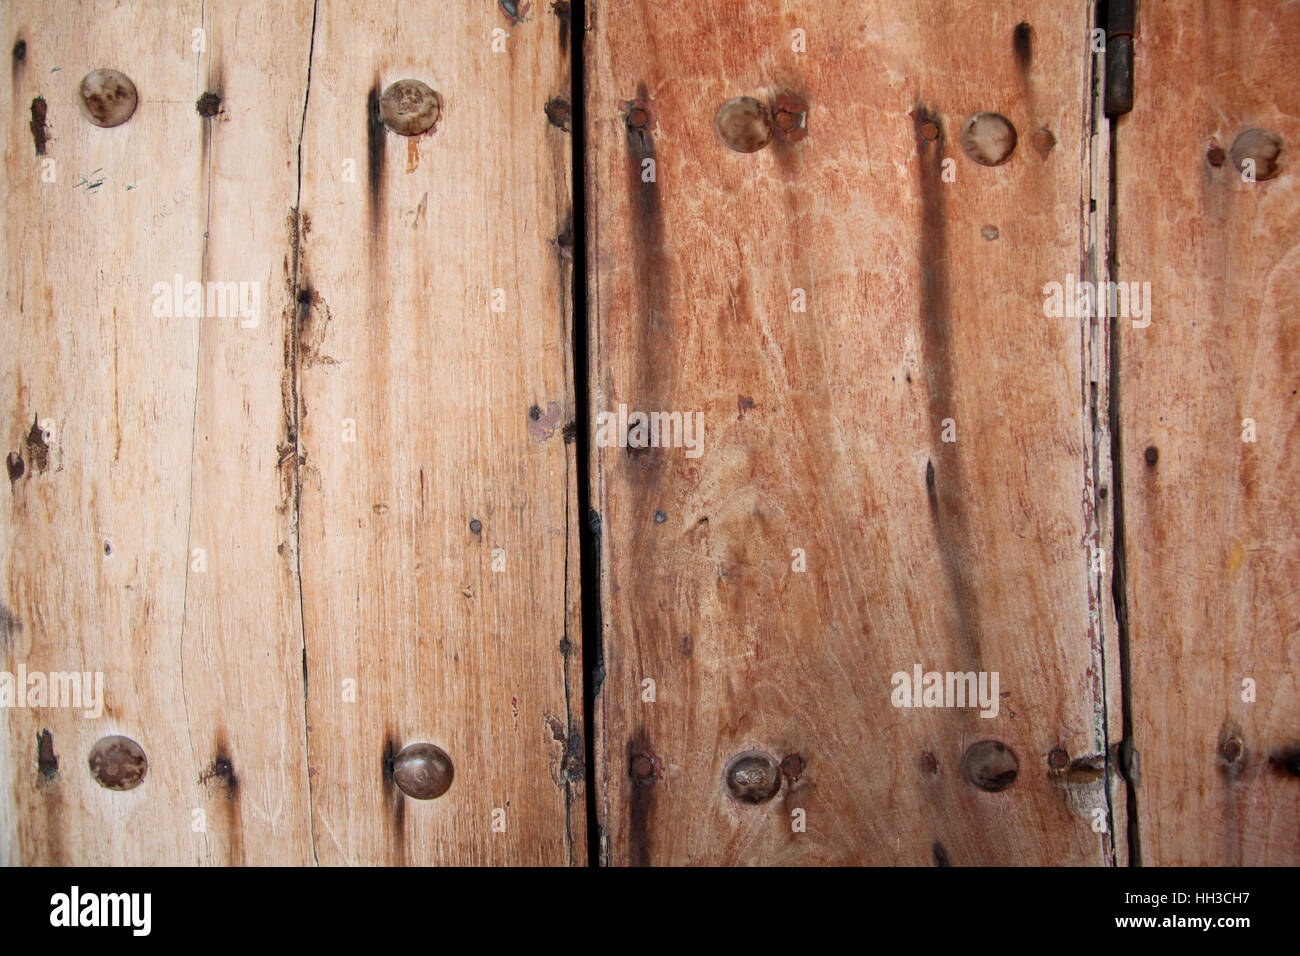 Worn, weathered wooden door or gate with strong & secure metal nails through it, Cartagena, Colombia, South America. Stock Photo